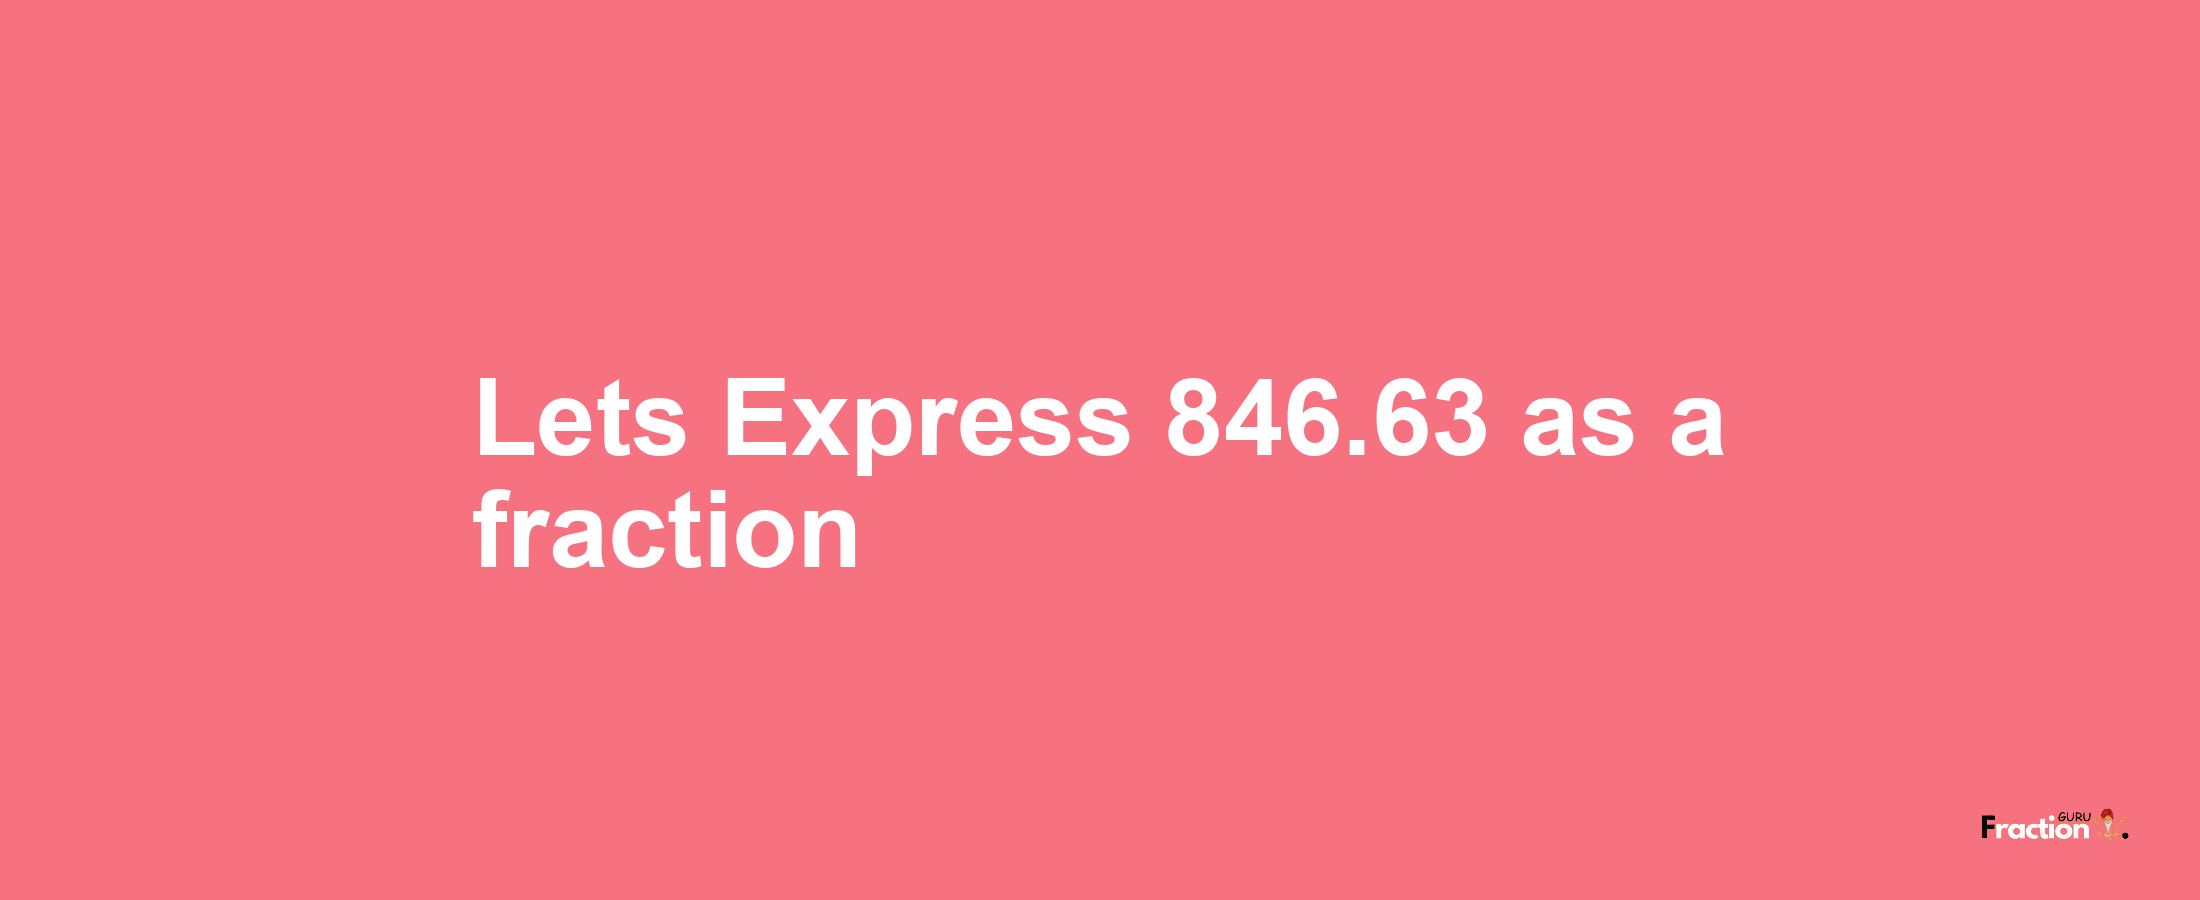 Lets Express 846.63 as afraction